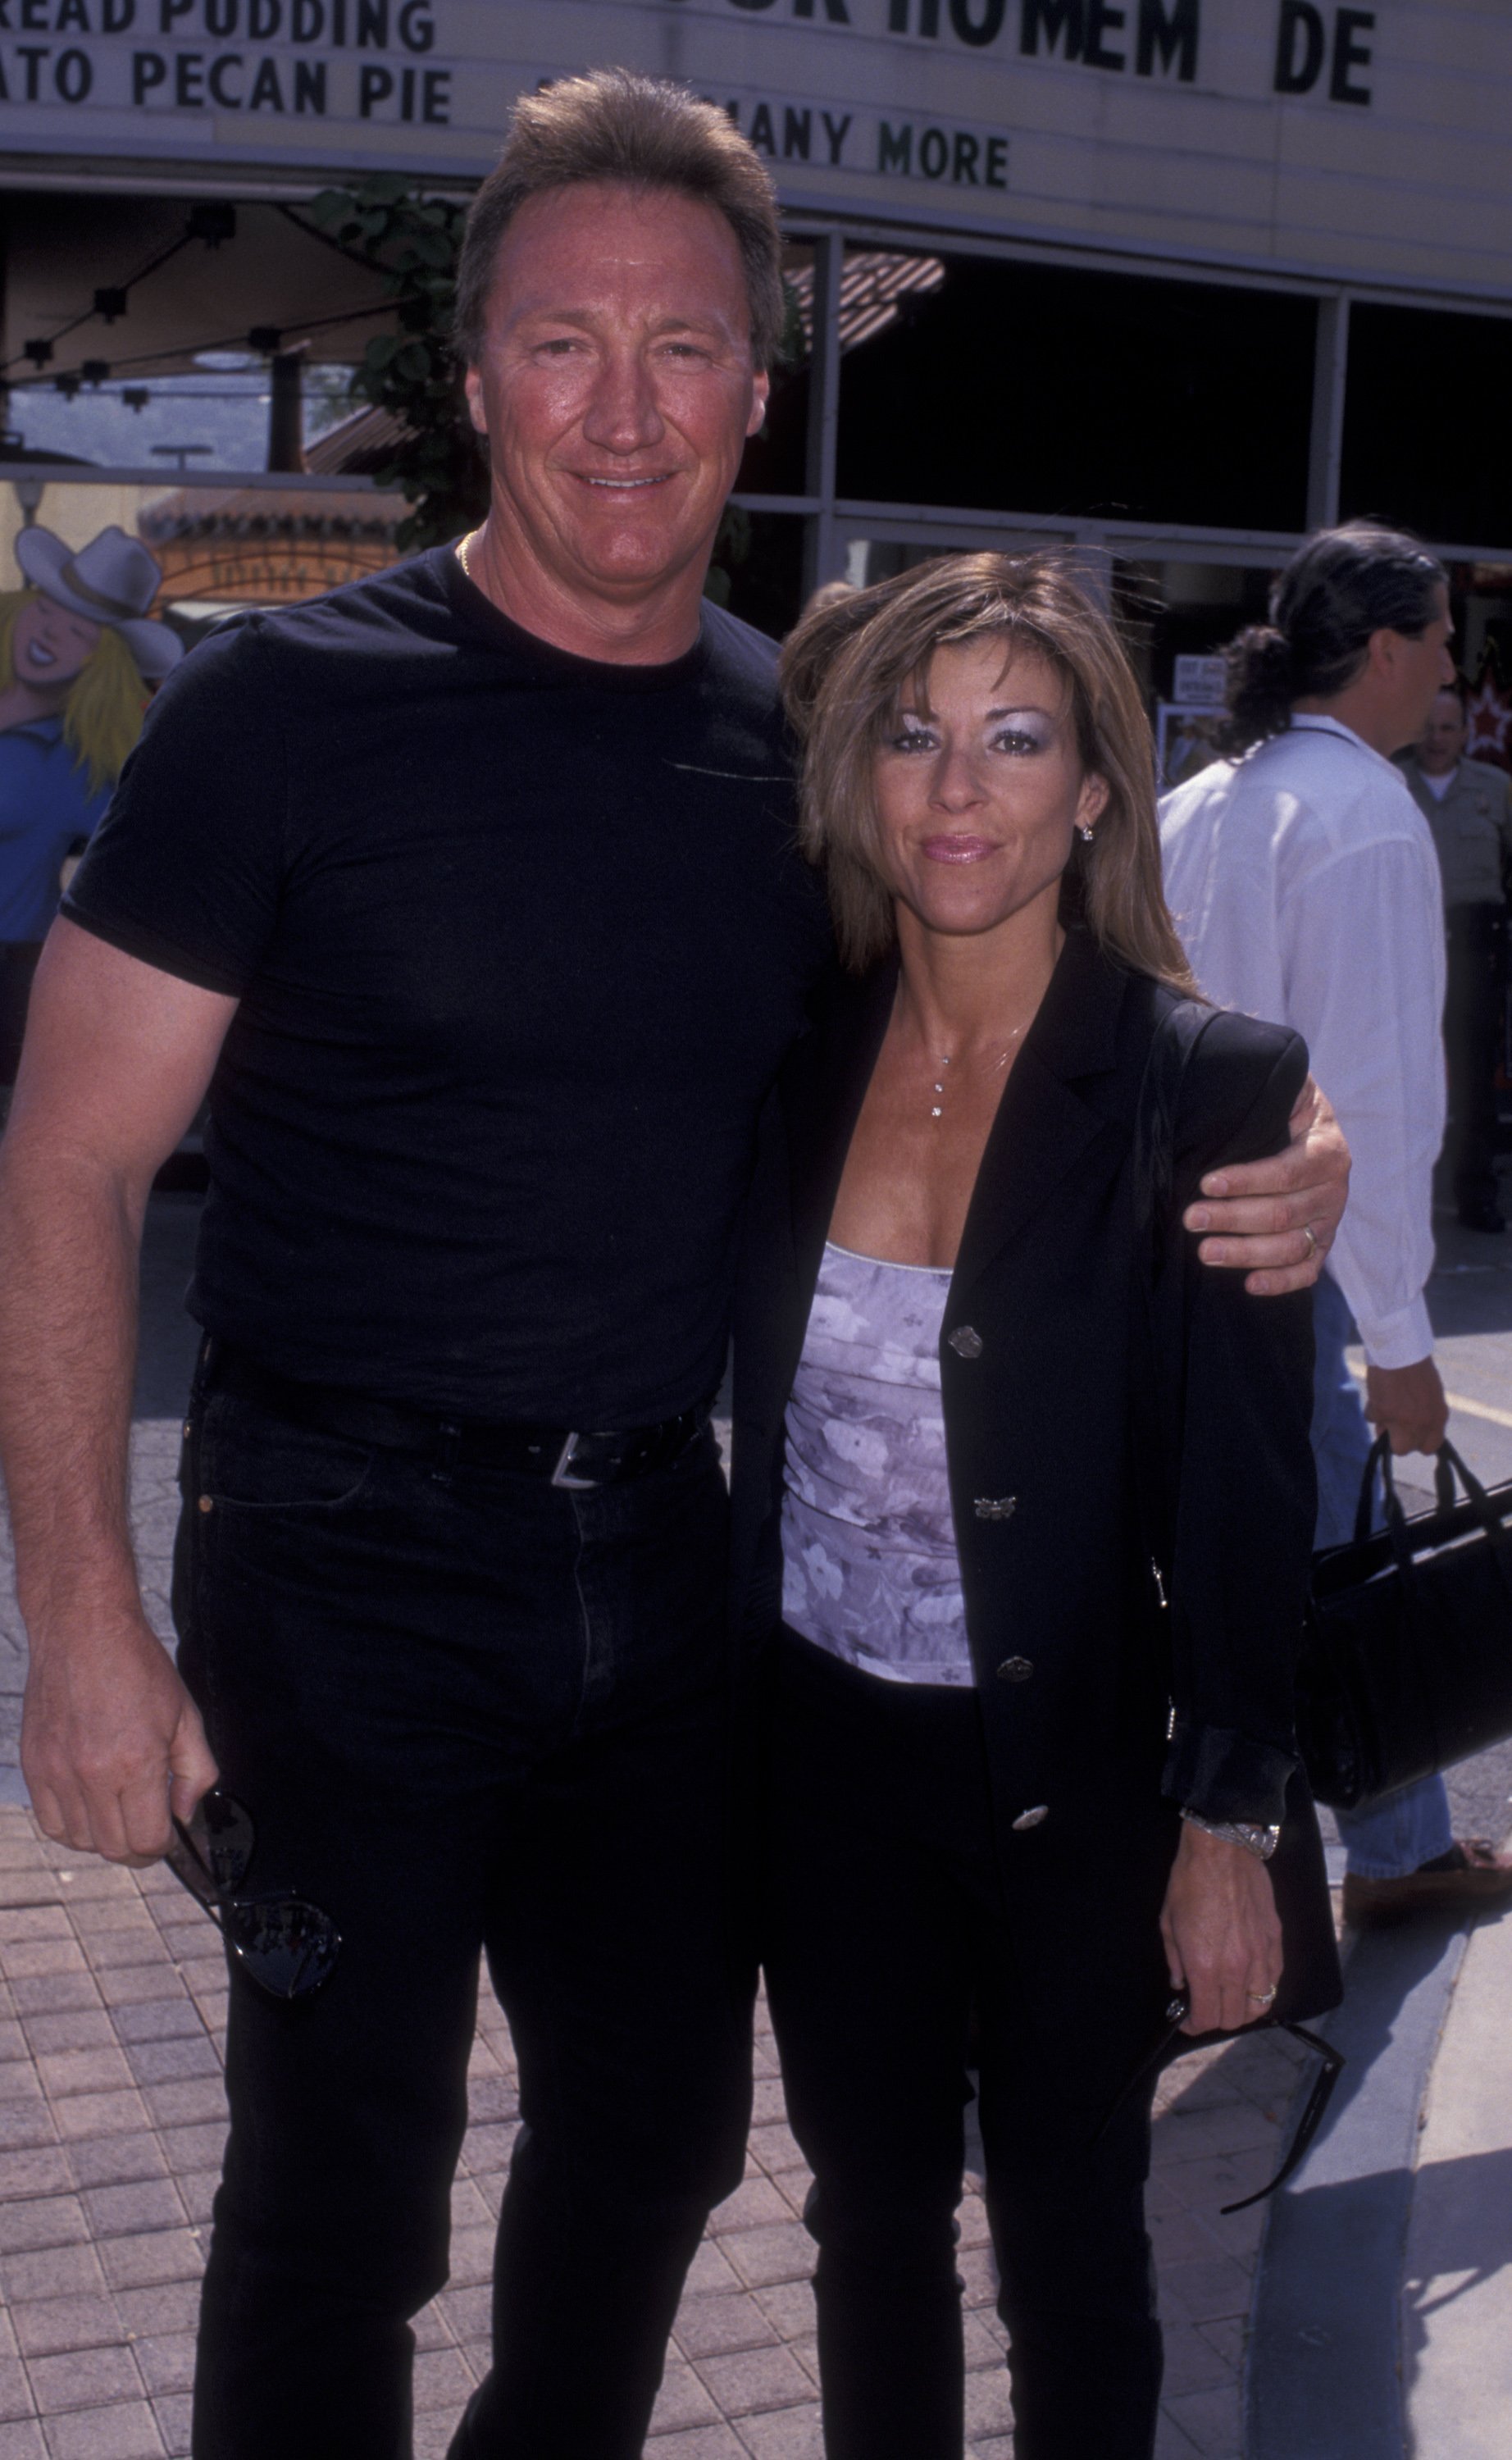 Alan Autry and Kimberlee Autry at the 34th Annual Academy of Country Music Awards hosted at the Country Star Restaurant, Universal City, California on May 4, 1999. | Source: Getty Images